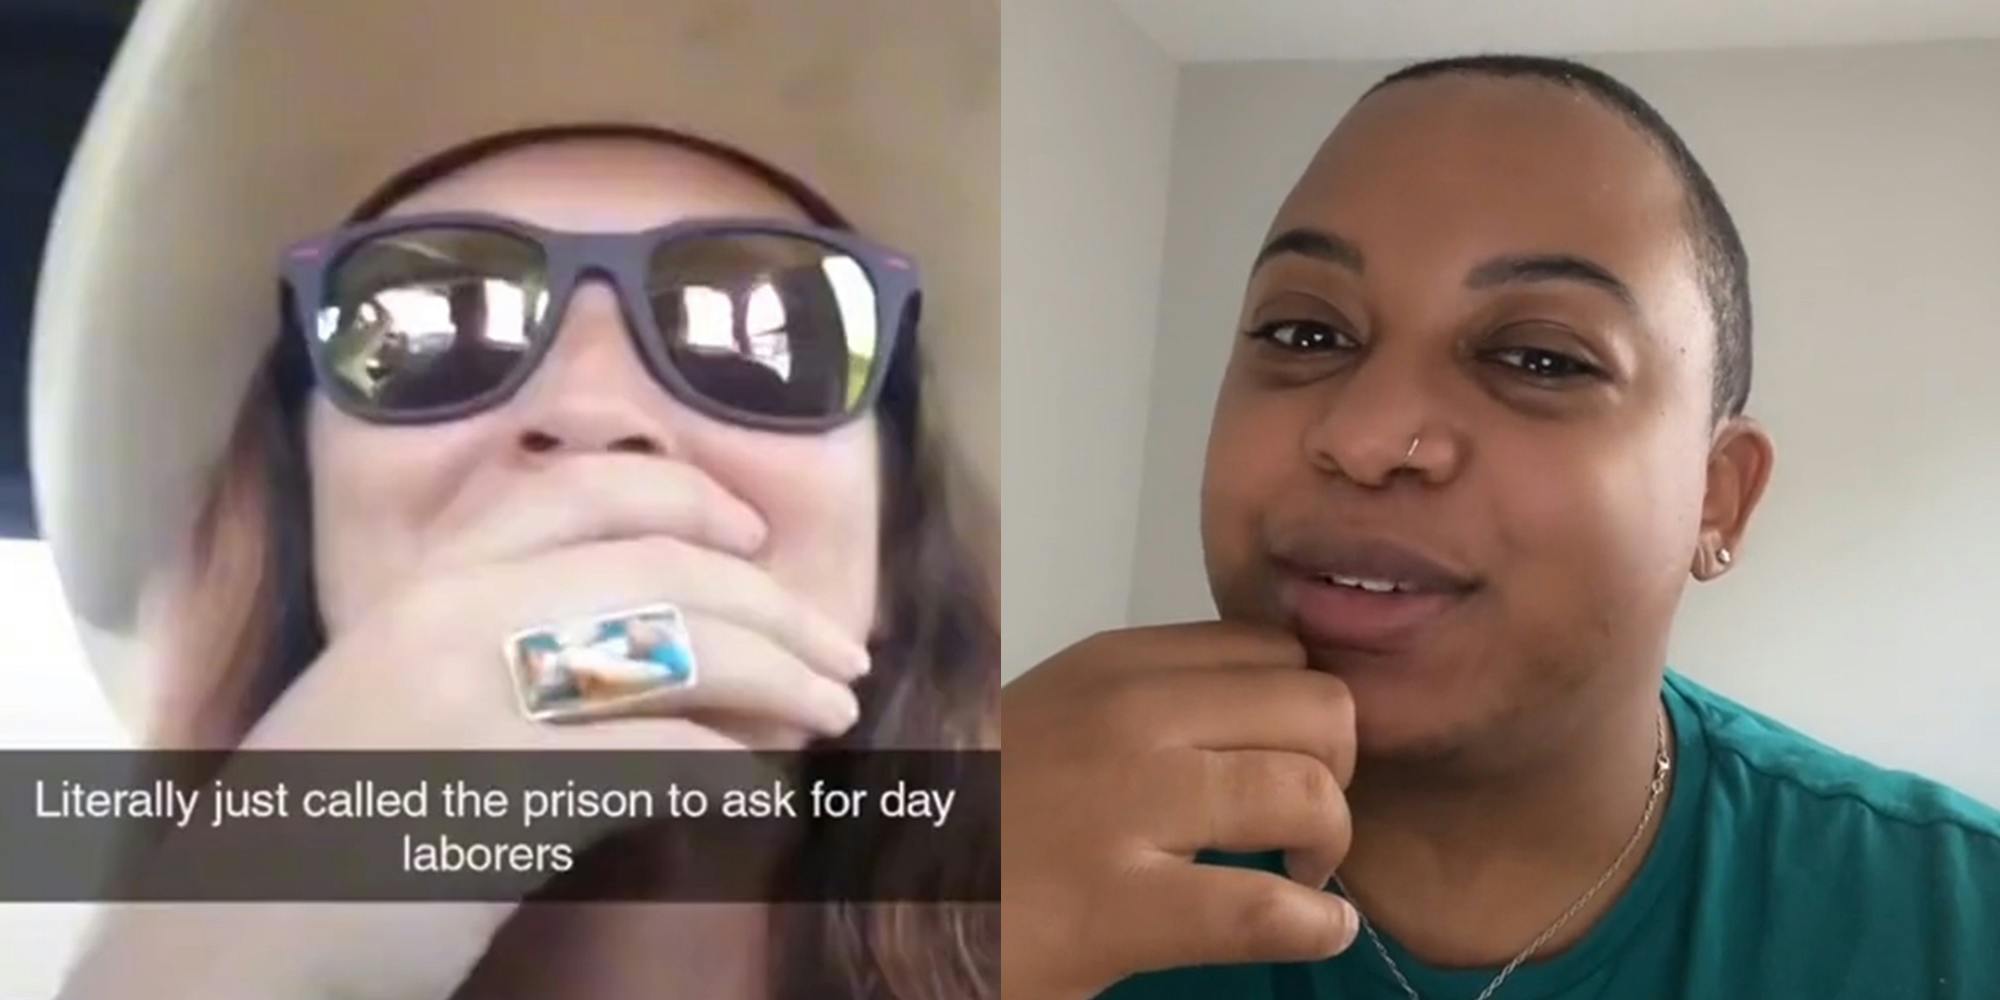 woman wearing sunglasses and hat covering smirk with hand with caption "Literally just called the prison to ask for day laborers" (l) woman replying (r)